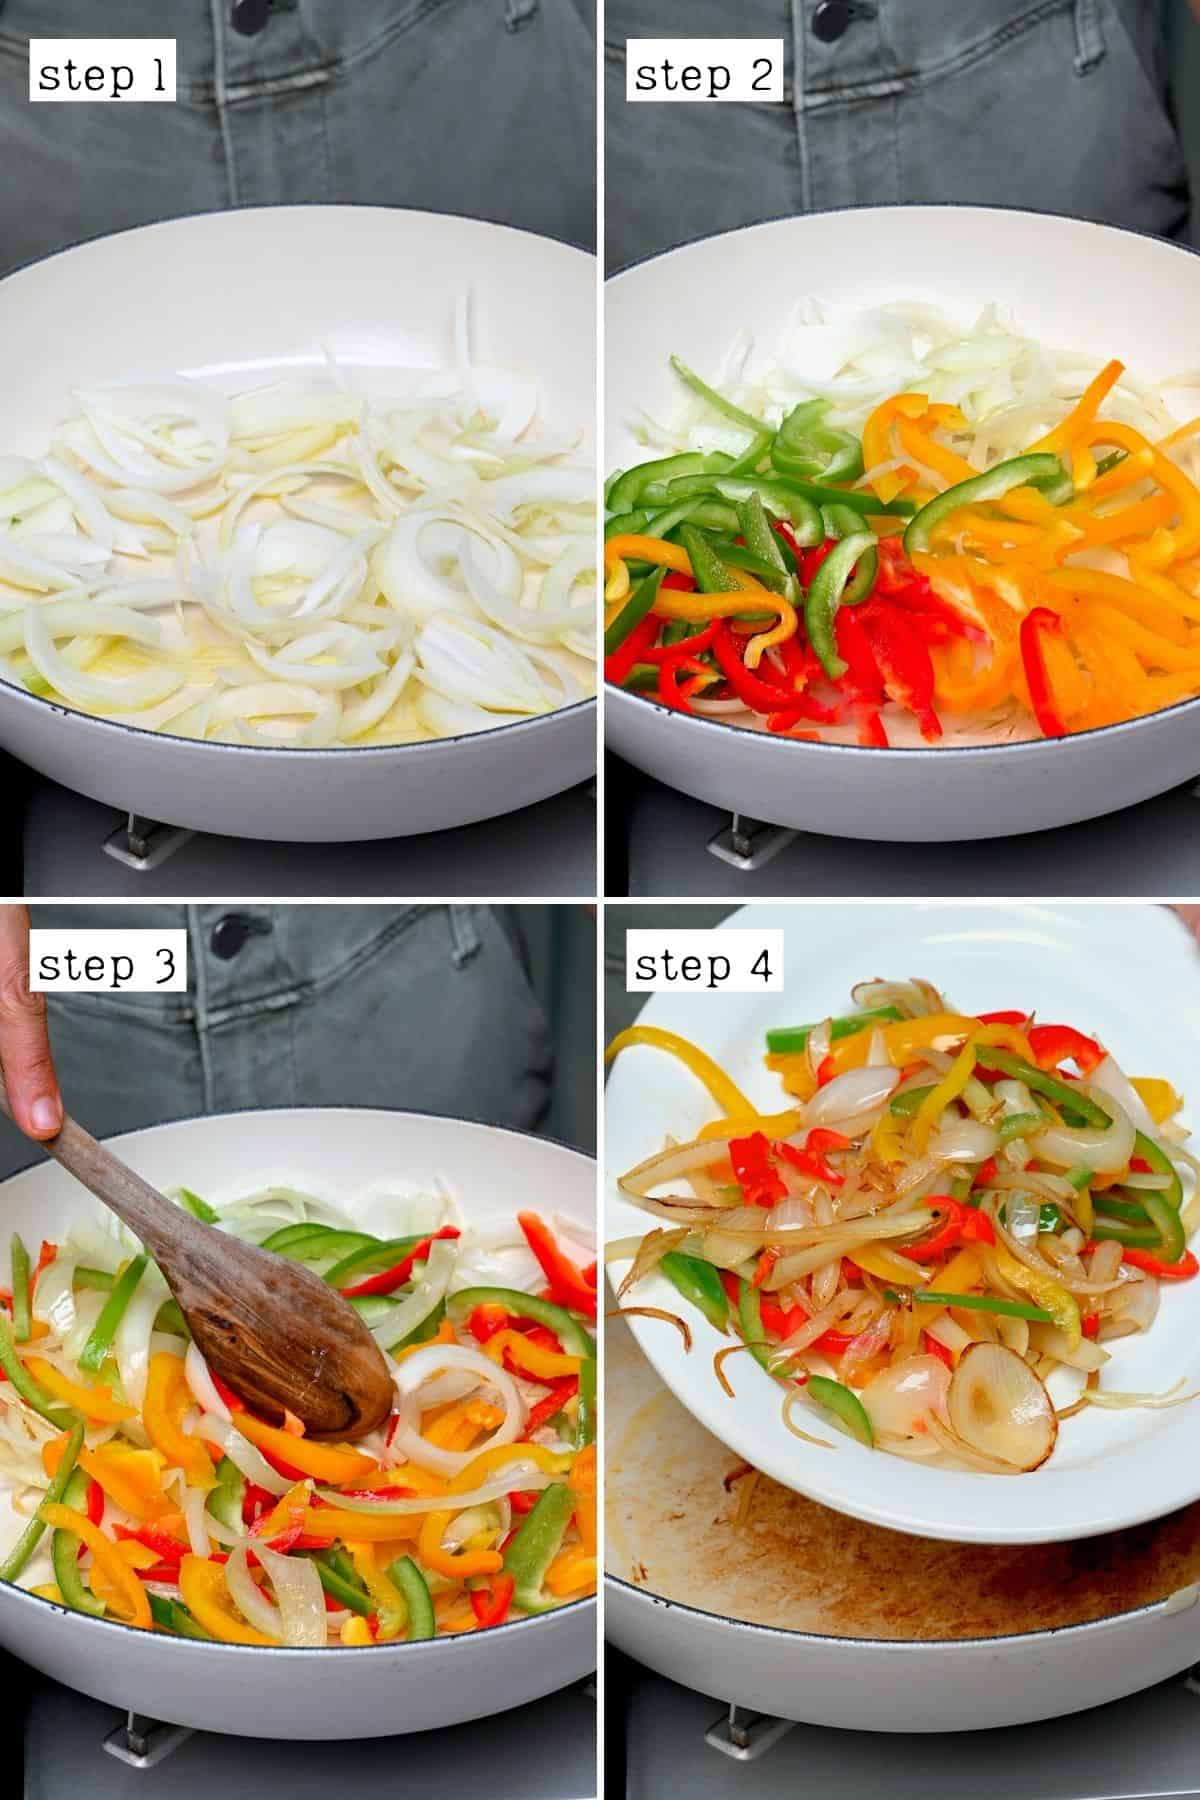 Steps for cooking onion and bell peppers